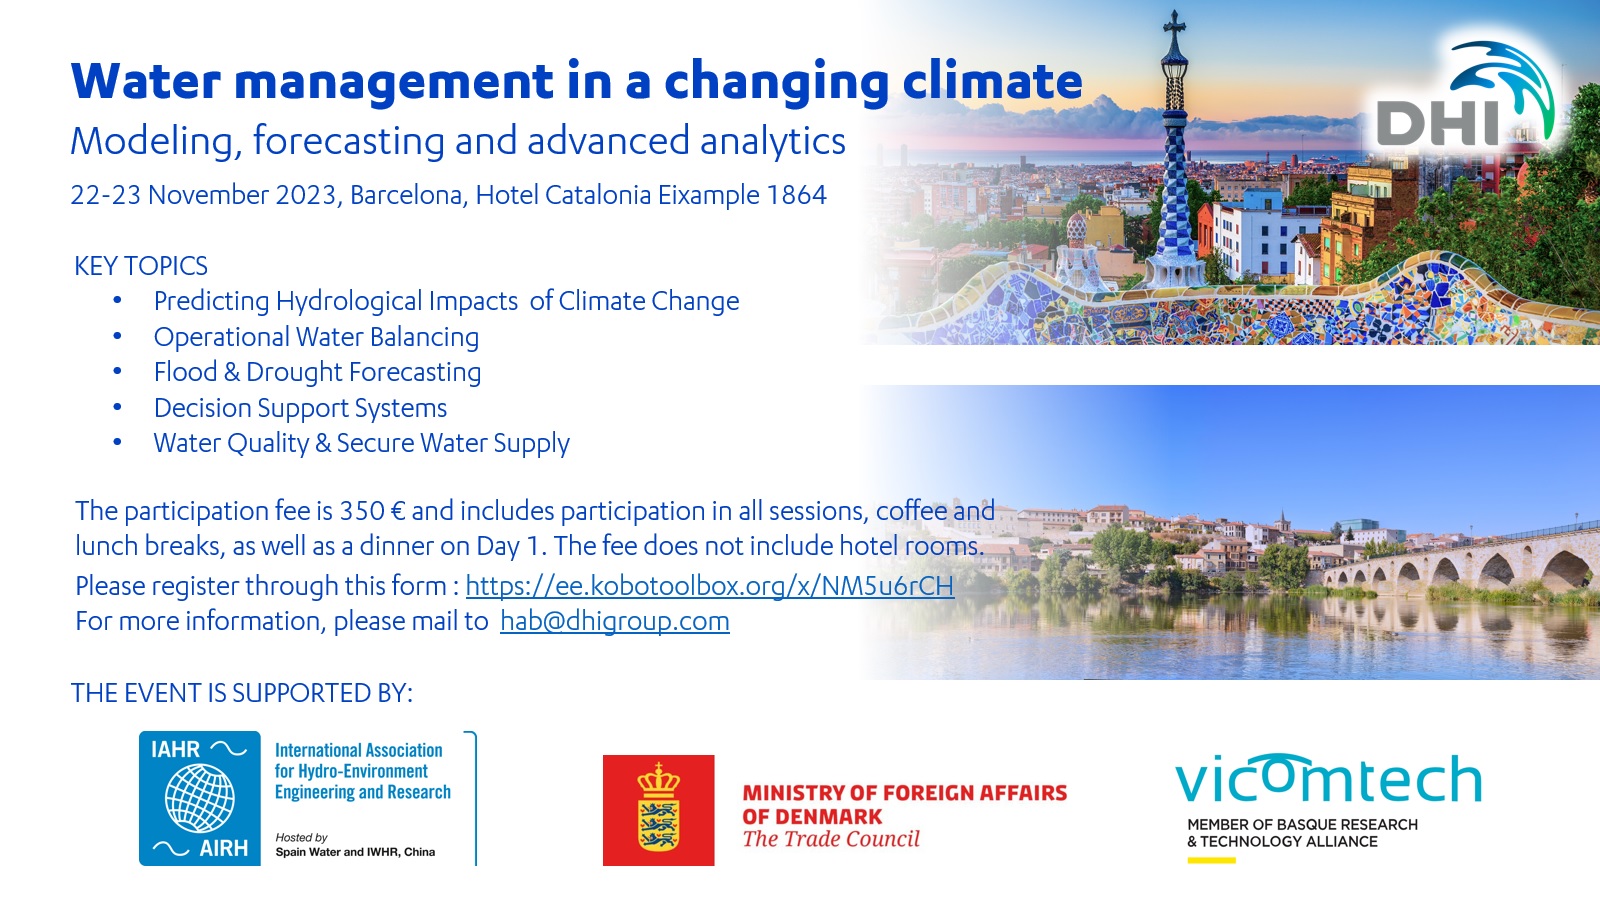 Water management in a changing climate. Modeling, forecasting and advanced analytics